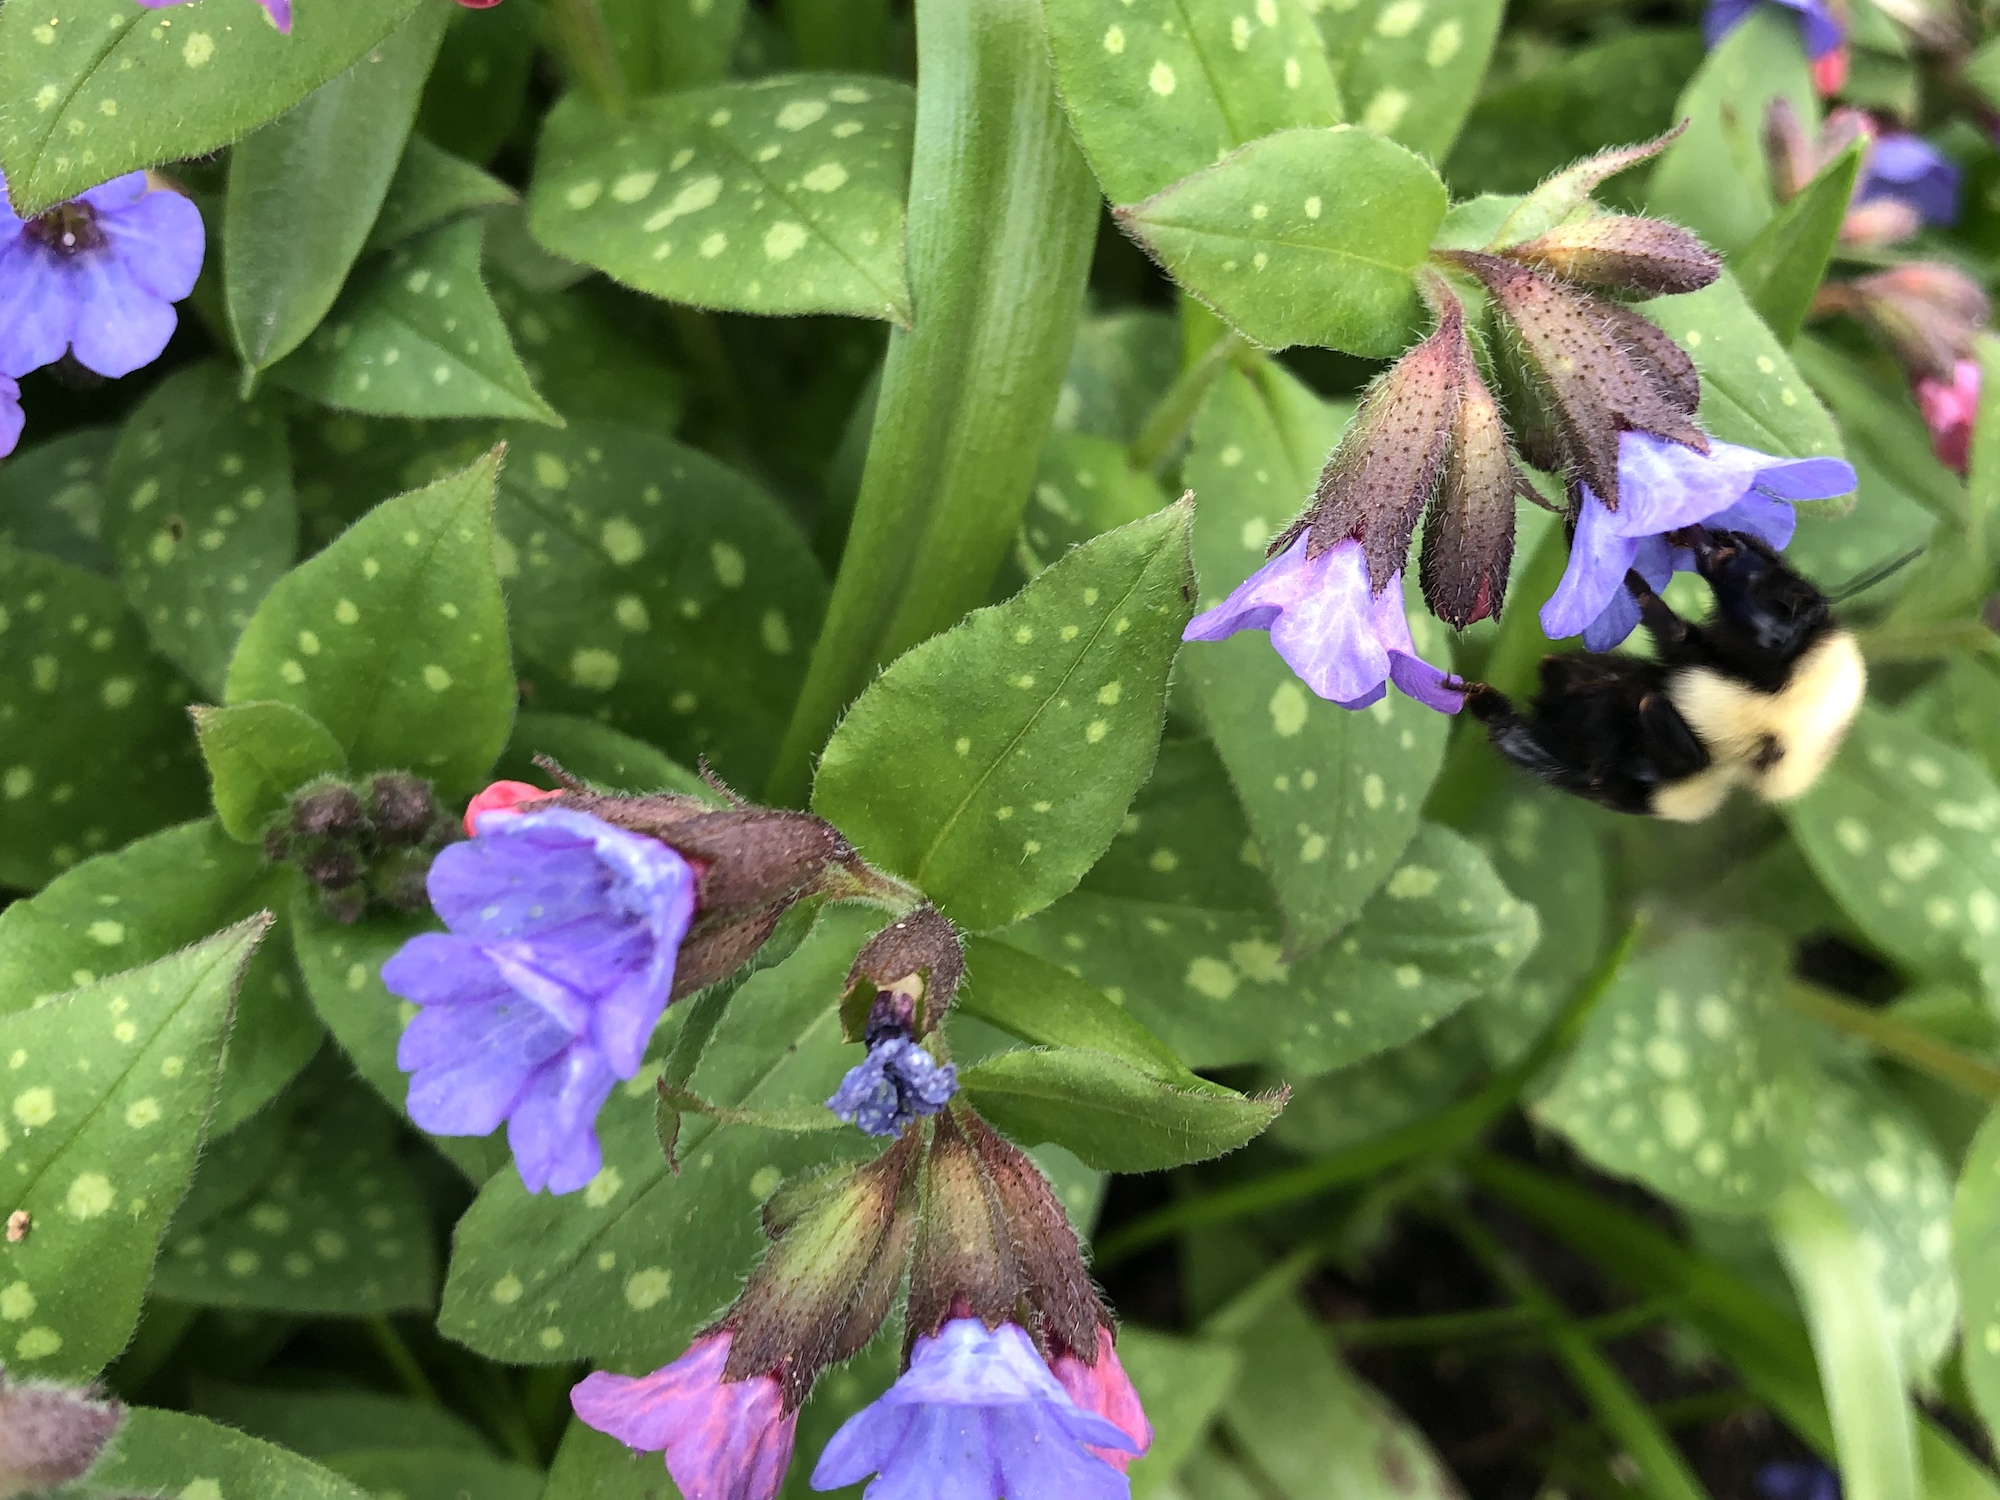 Lungwort near Agawa Path in Nakoma in Madison, Wisconsin on May 1, 2020.